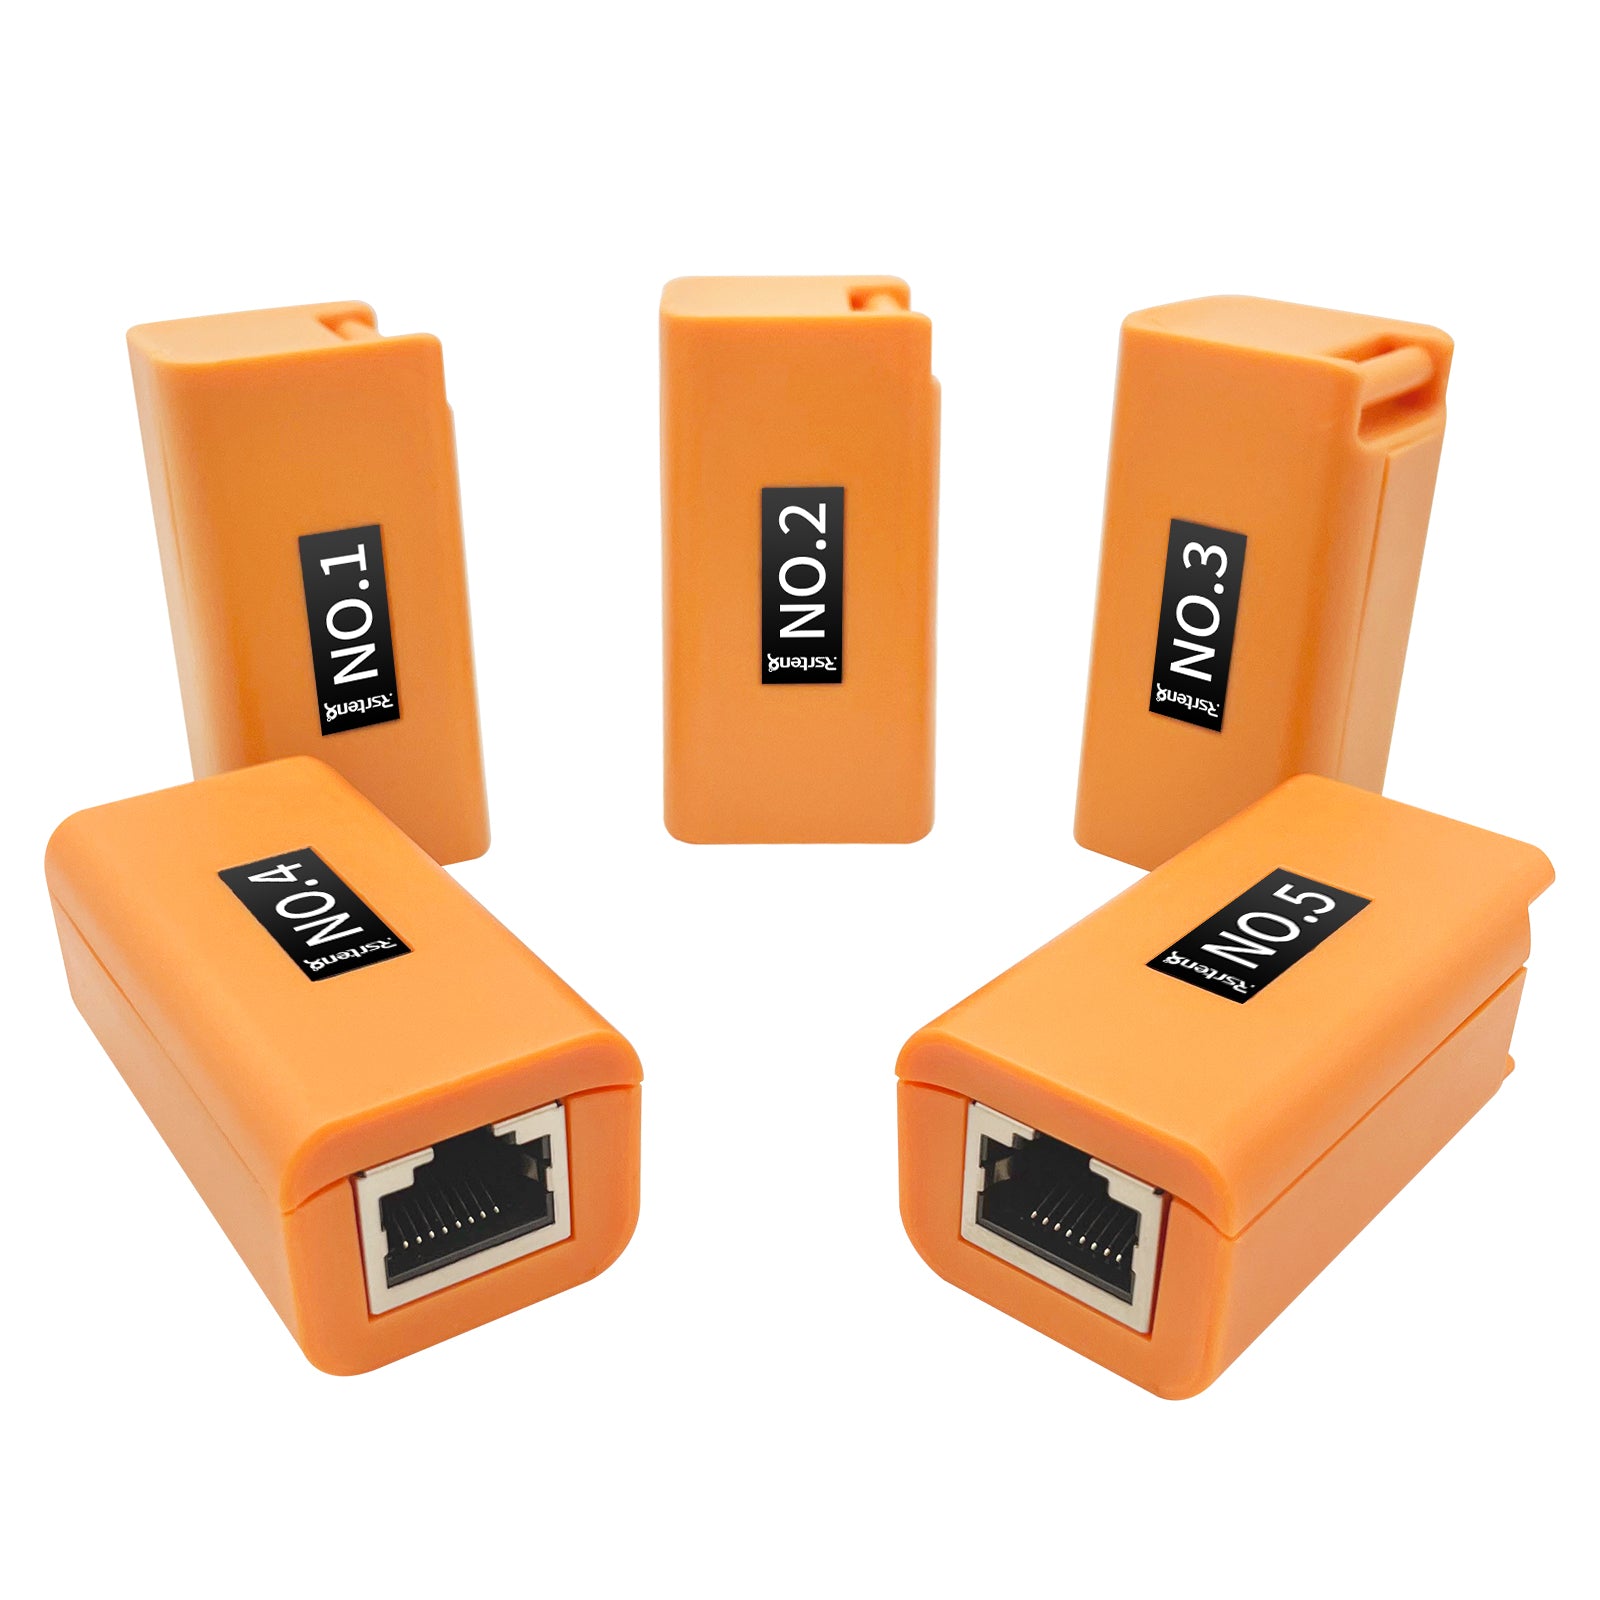 Rsrteng Network Cable Tester Remote Kits